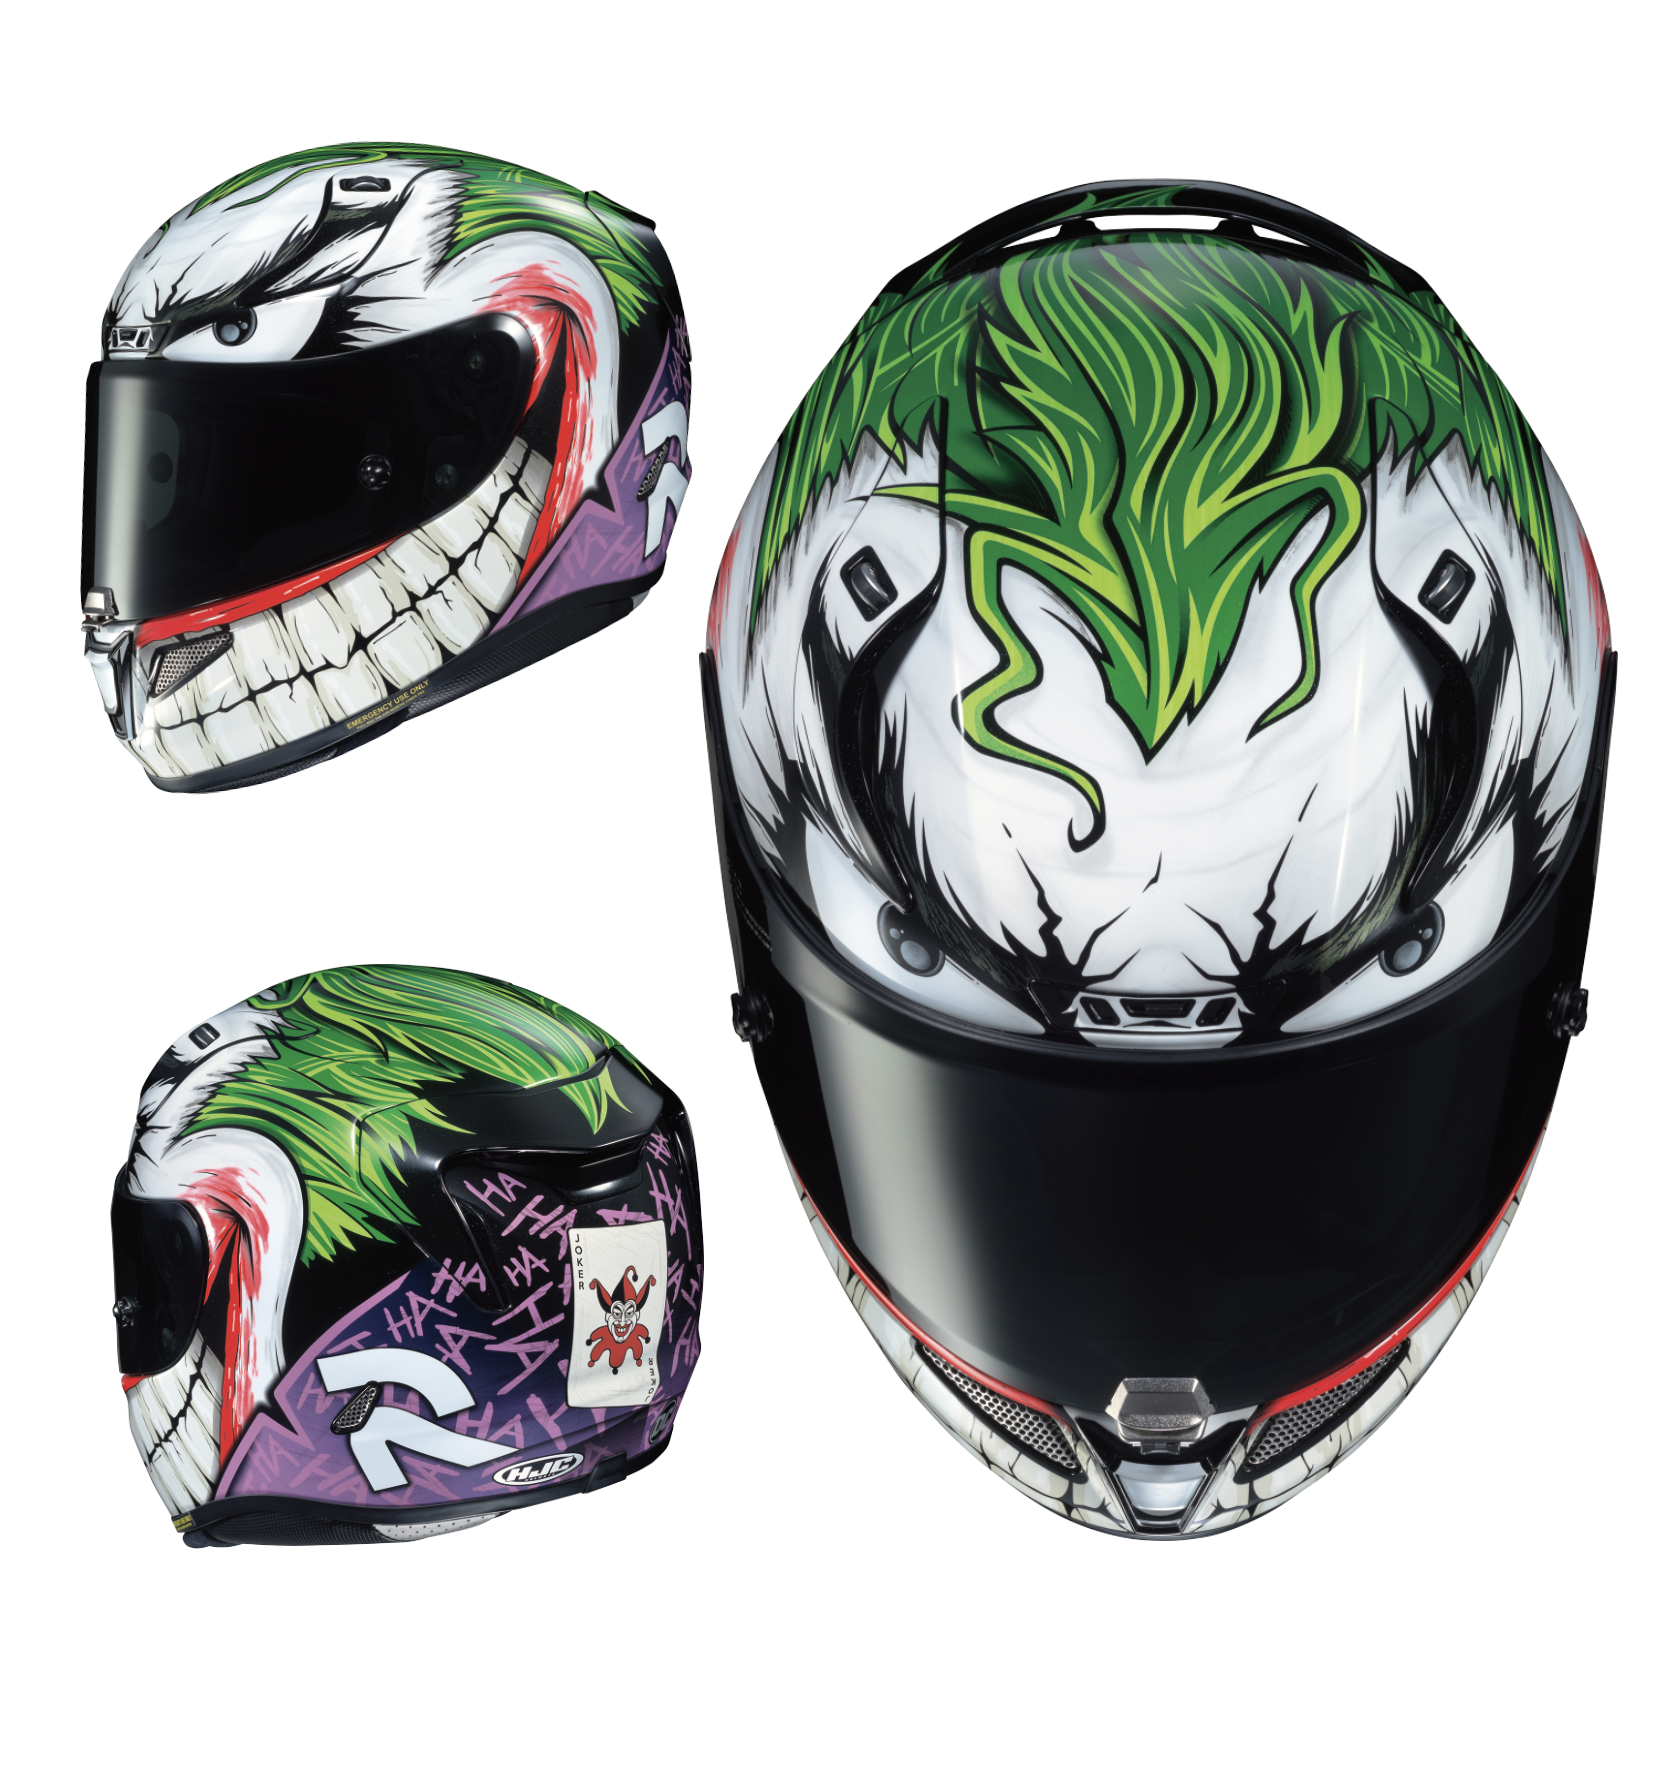 Put a big smile on your face, pick the Joker helmet | DriveMag Riders